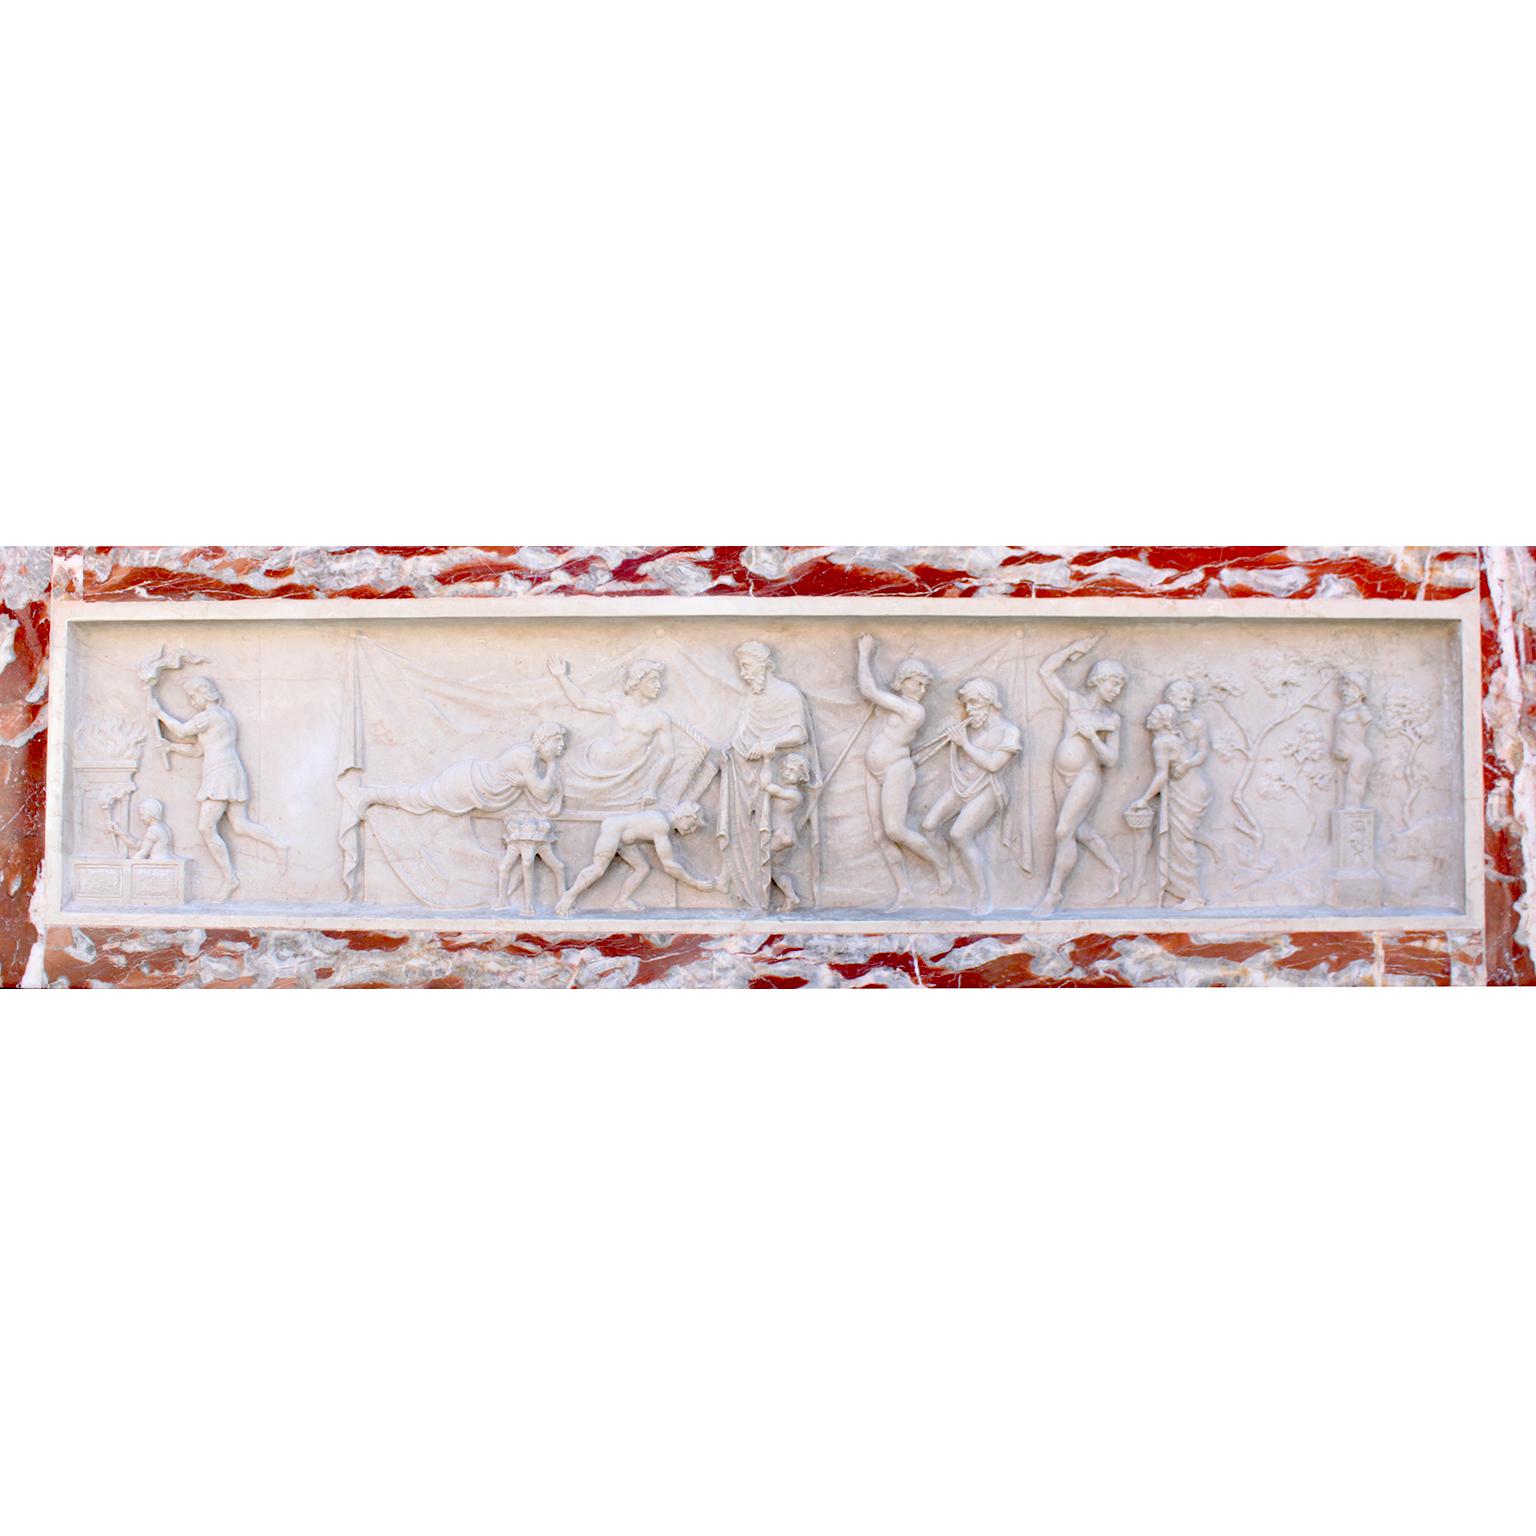 A Very Fine Italian 19th century Greco-Roman style carved Carrara marble bas-relief Frieze, after the antique. The finely carved white marble frieze in relief, depicting a mythological scene of daily life in Ancient Rome in a Roman baths setting;